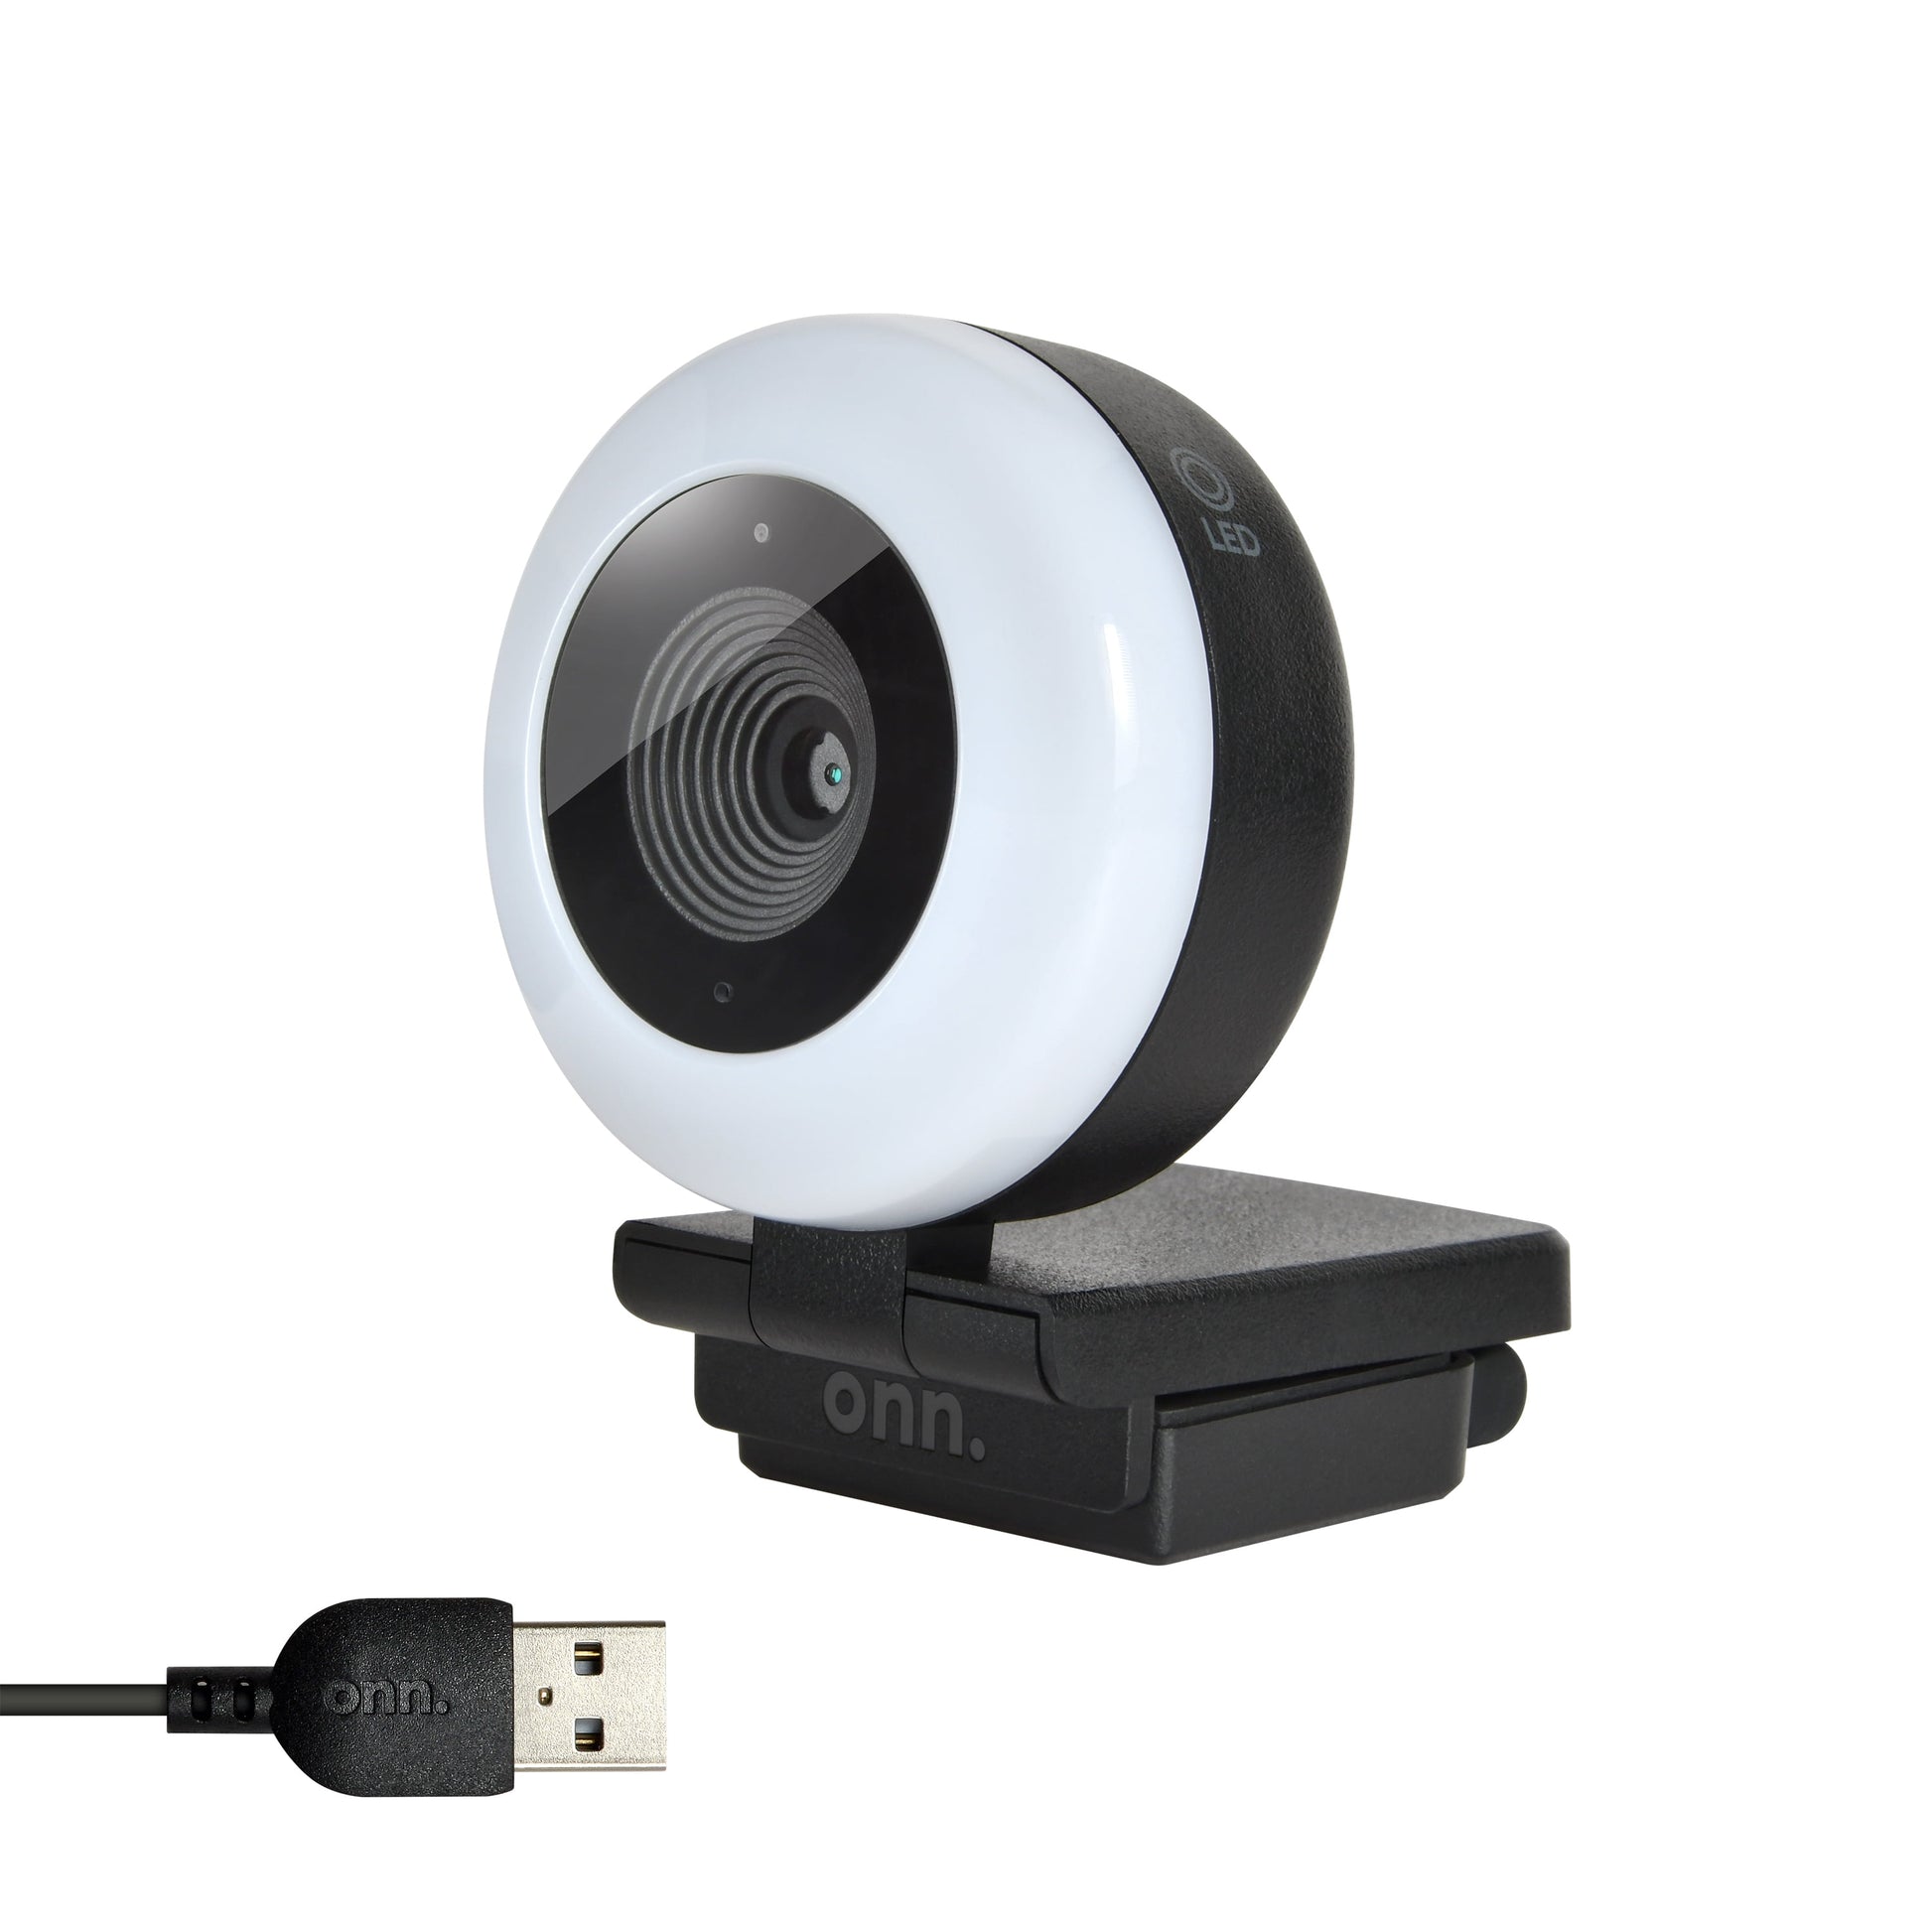 Webcam with Ring Light 3 LED Levels Autofocus Built-In Microphone White & Black